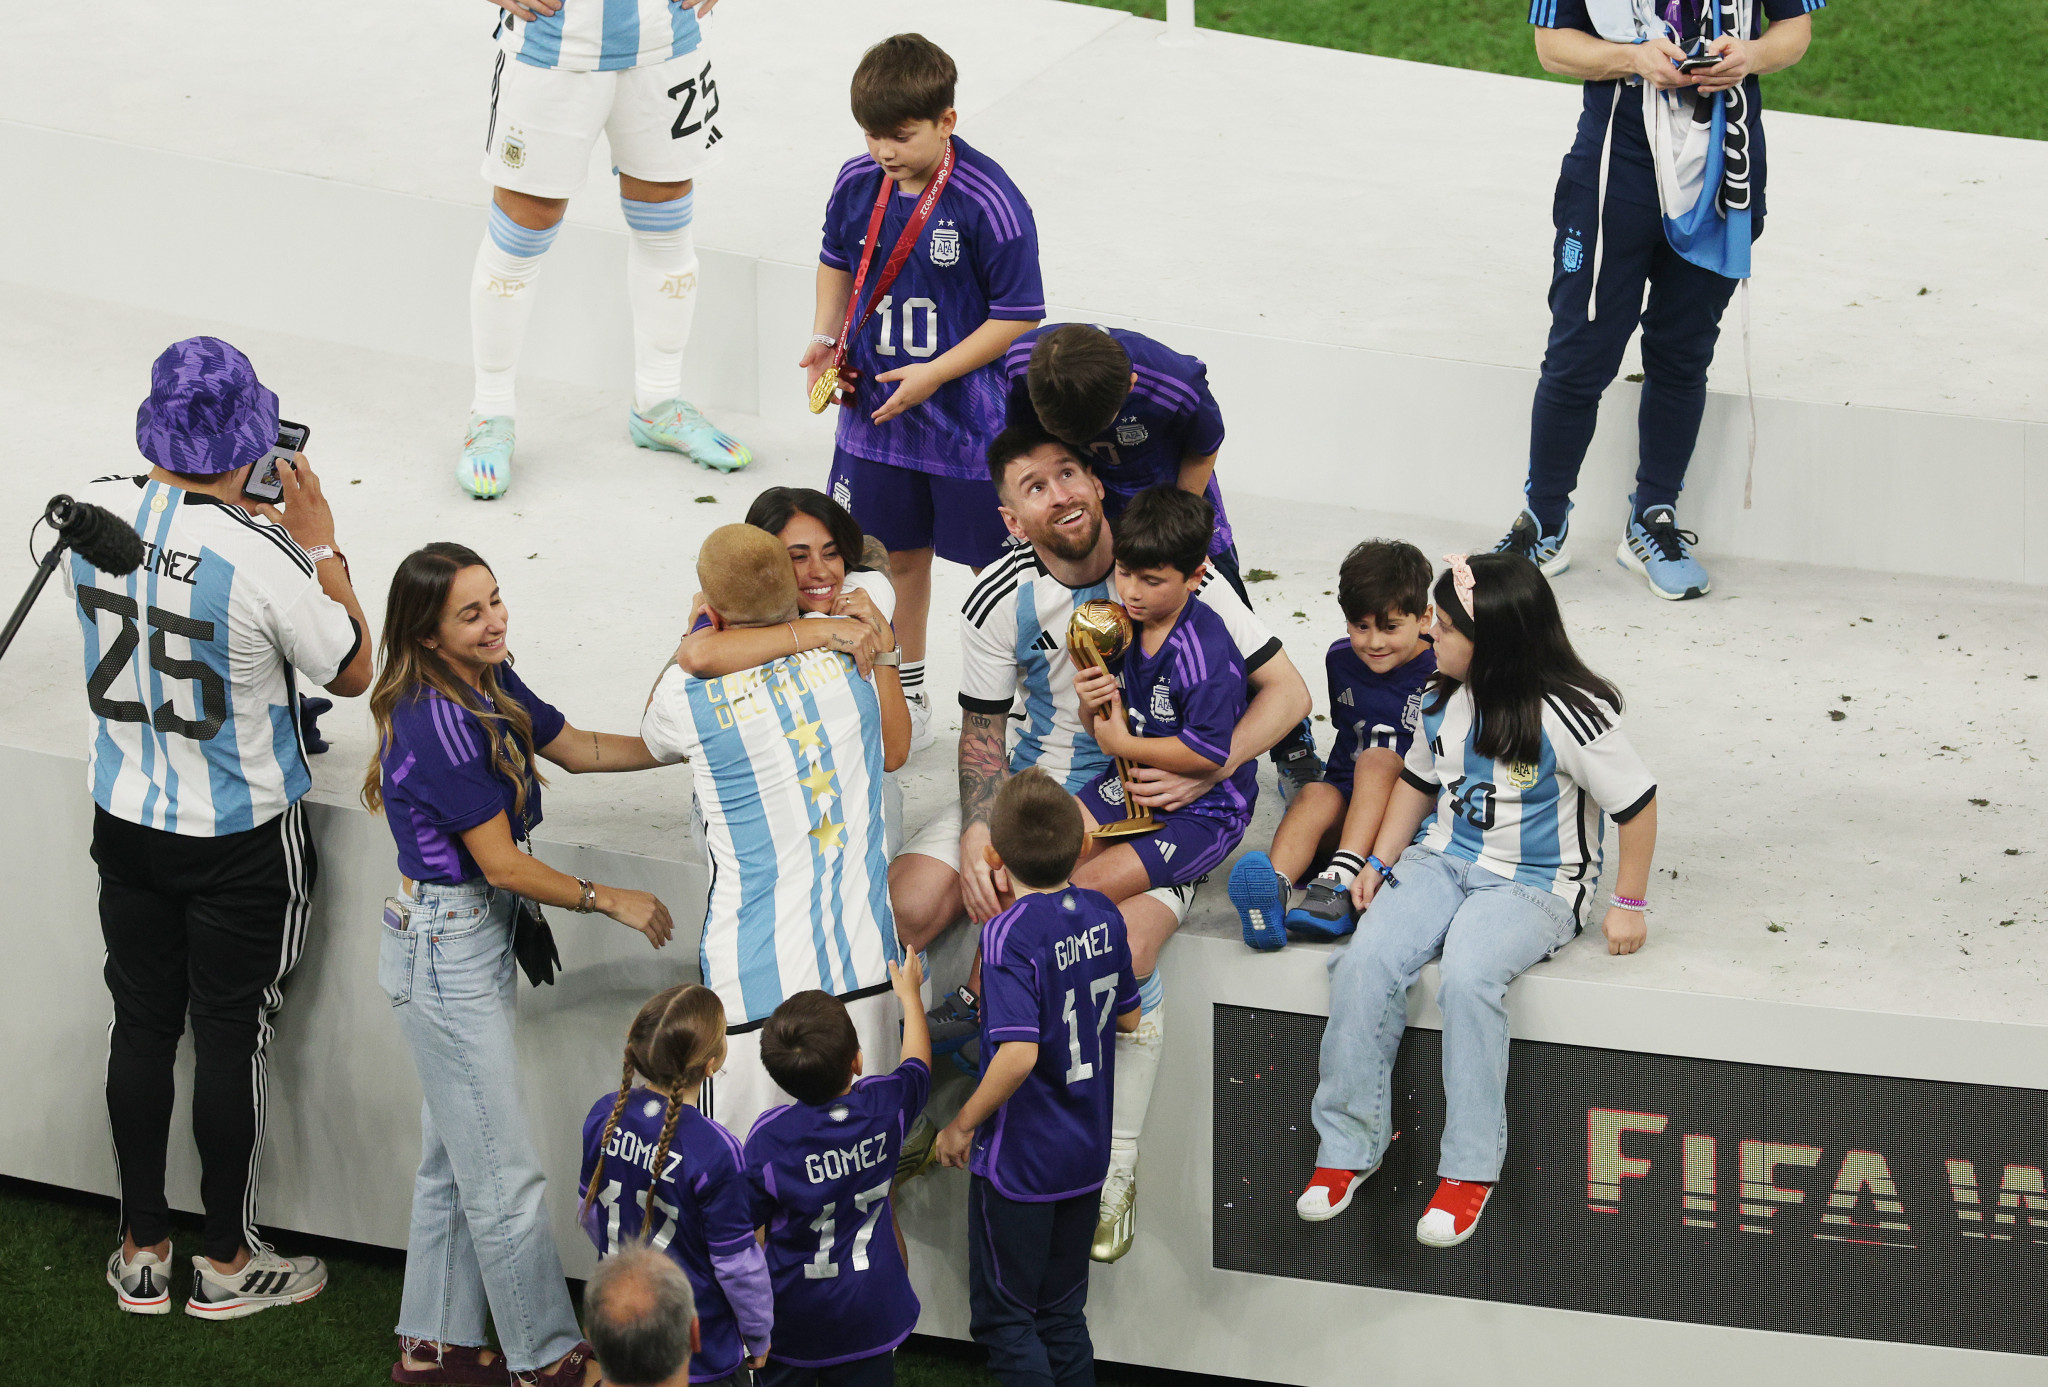 Messi celebrates with his family after the trophy ceremony ©Getty Images

